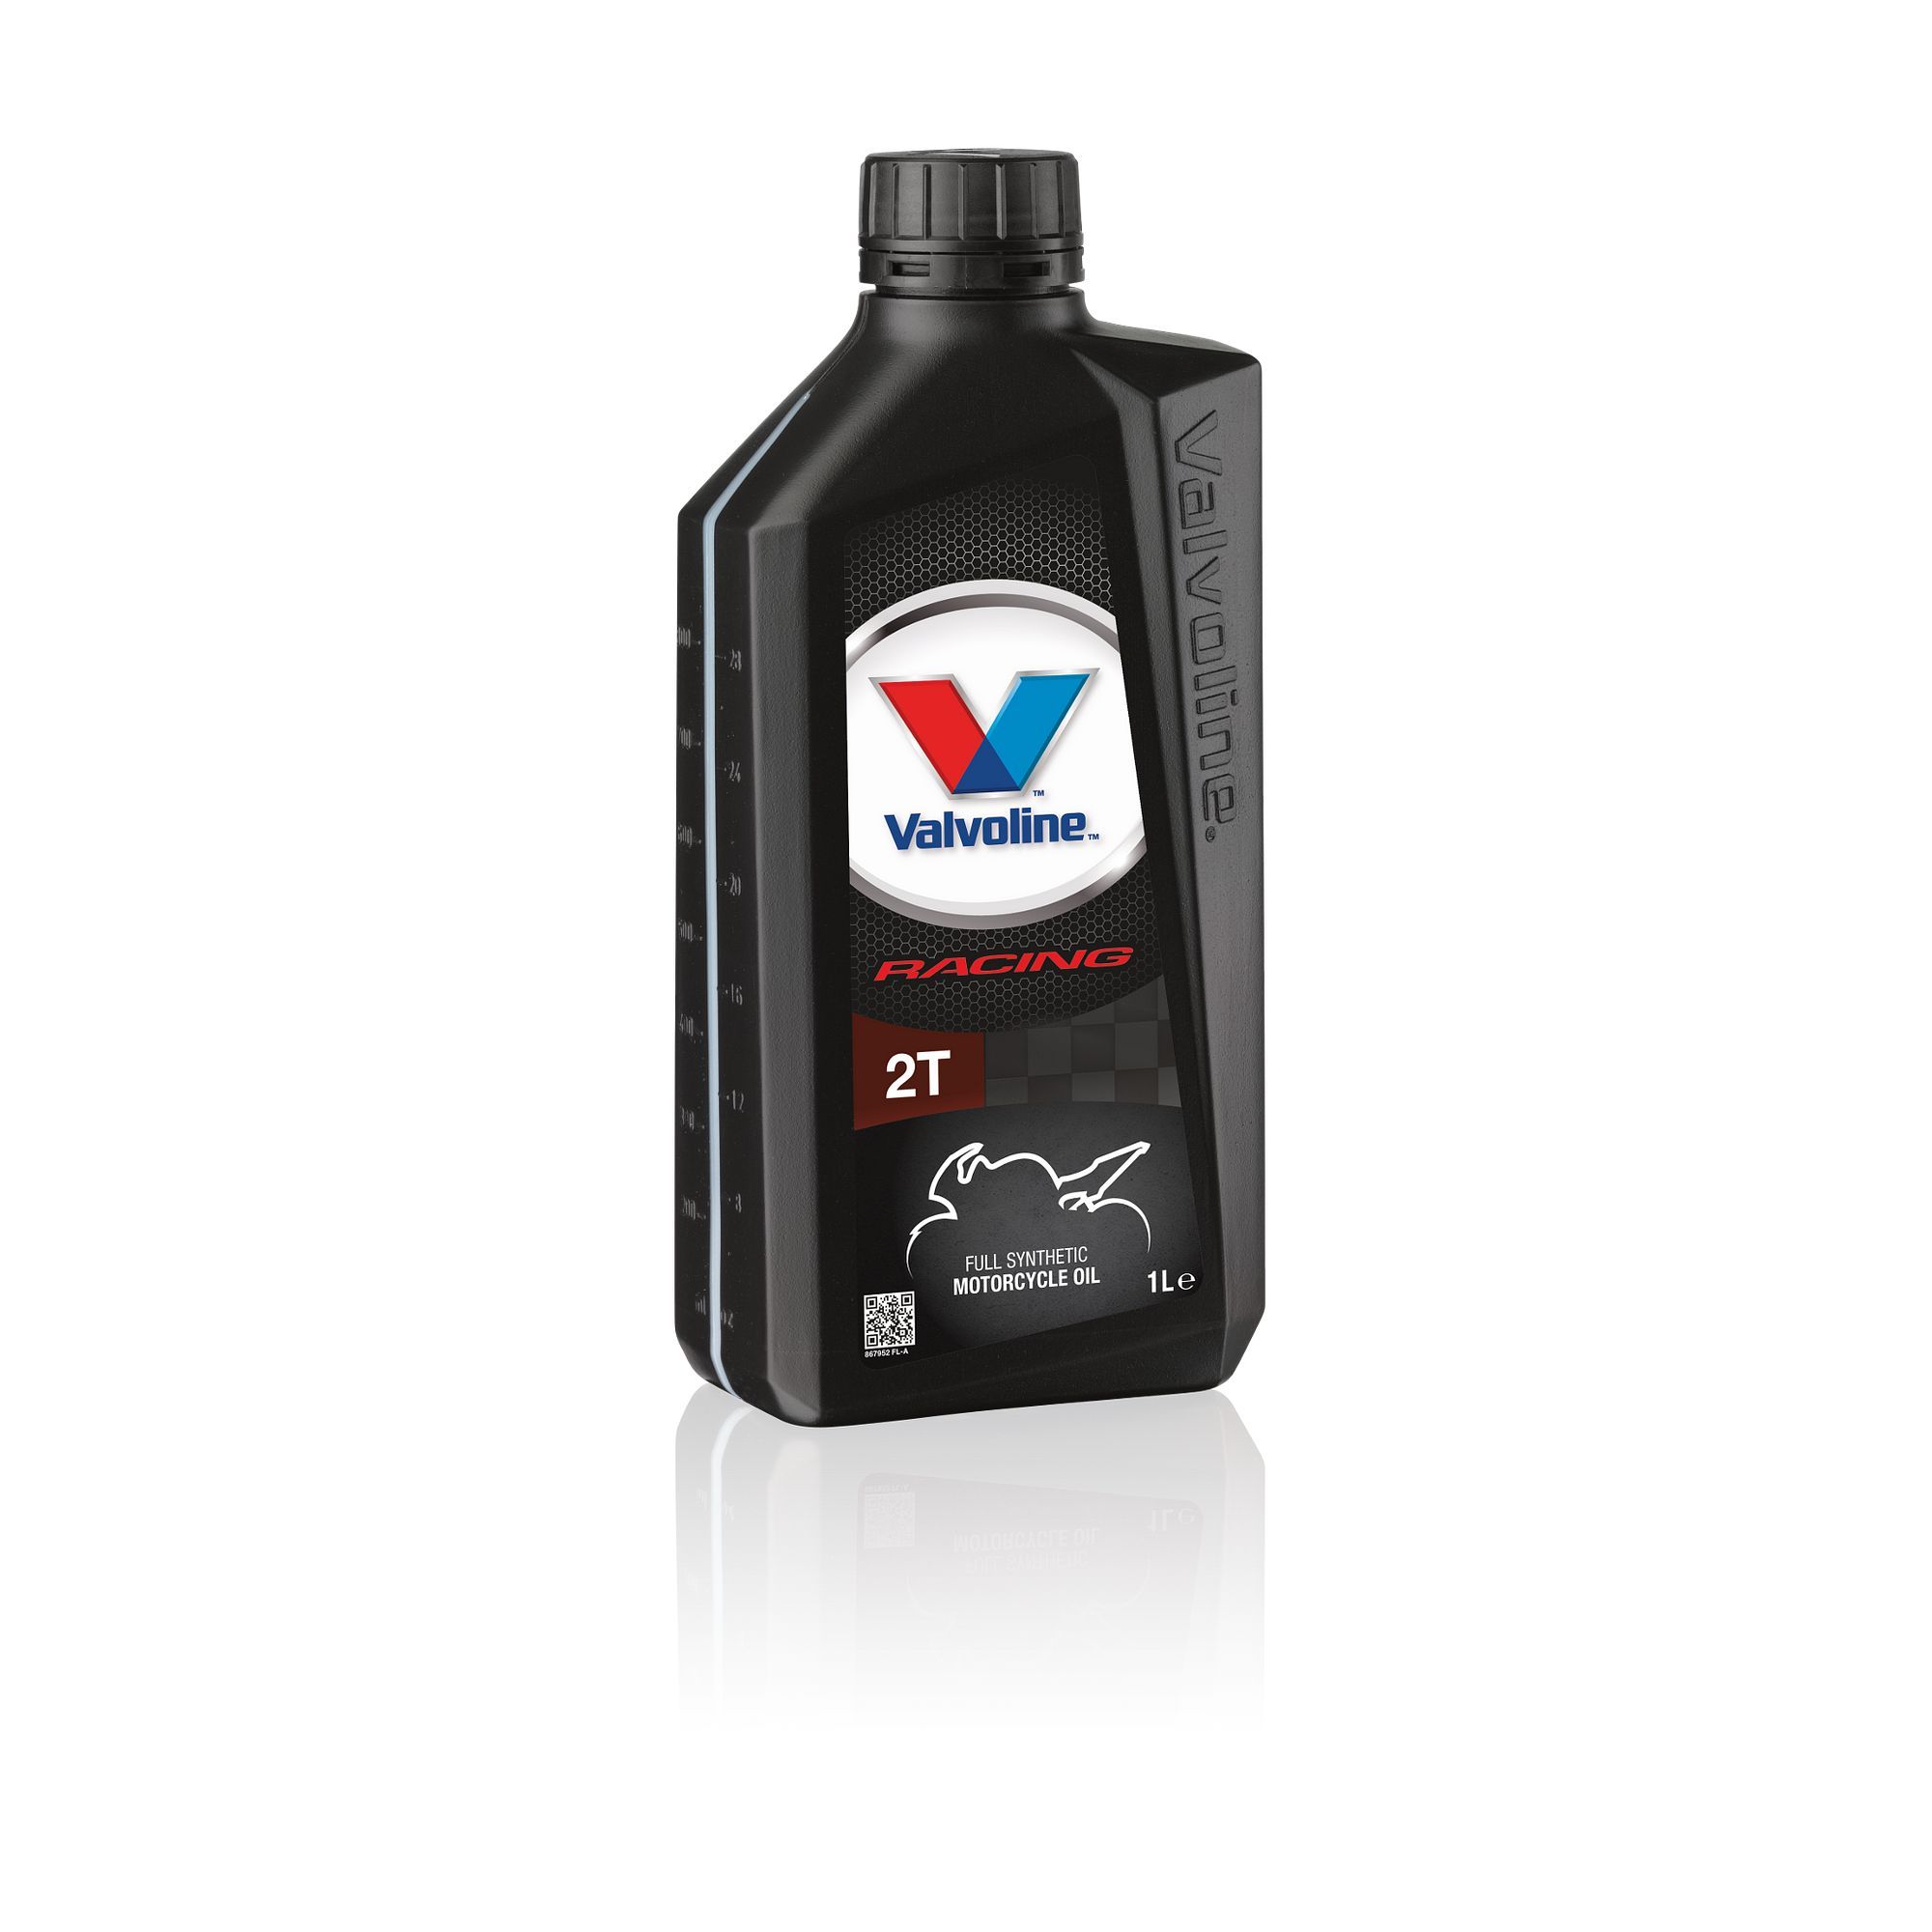 Т а4 масло. Valvoline 2t super outboard. Valvoline 75w80. Моторное мото масло Вальволин 10. Valvoline super outboard 4t SAE 10w-30.